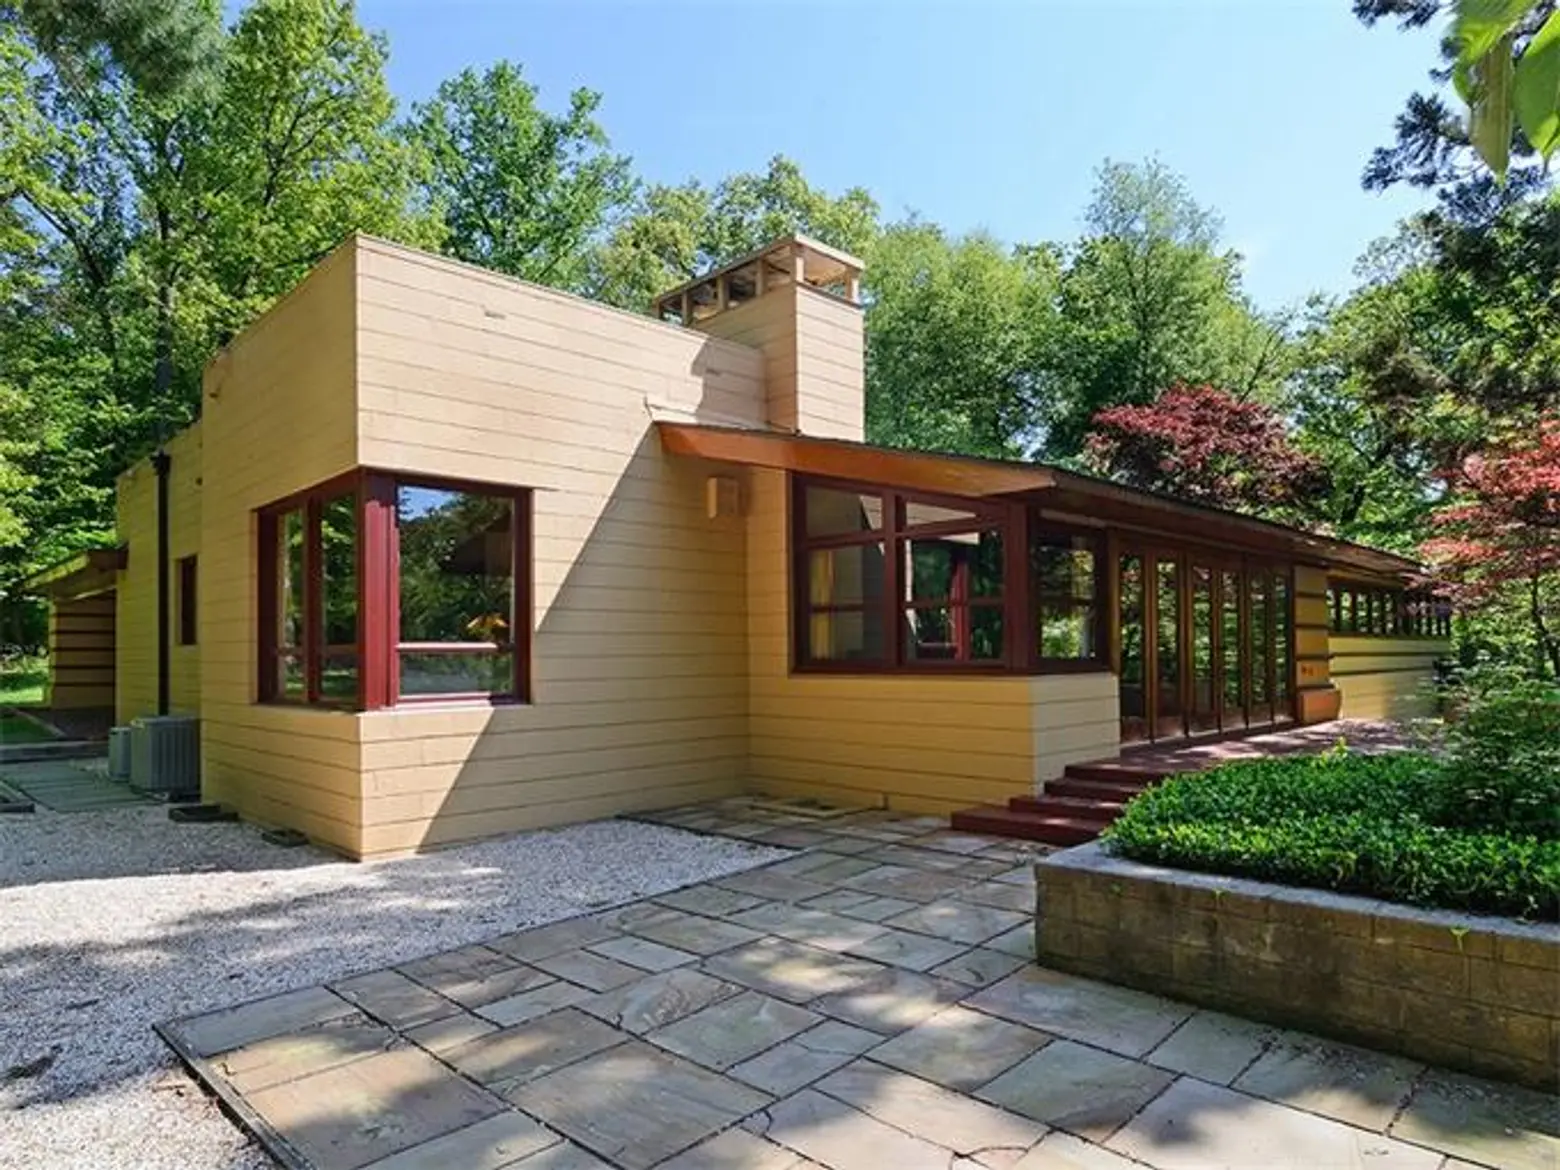 48 Clausland Mountain Road (also known as the Socrates Zaferiou House) designed by Frank Lloyd Wright